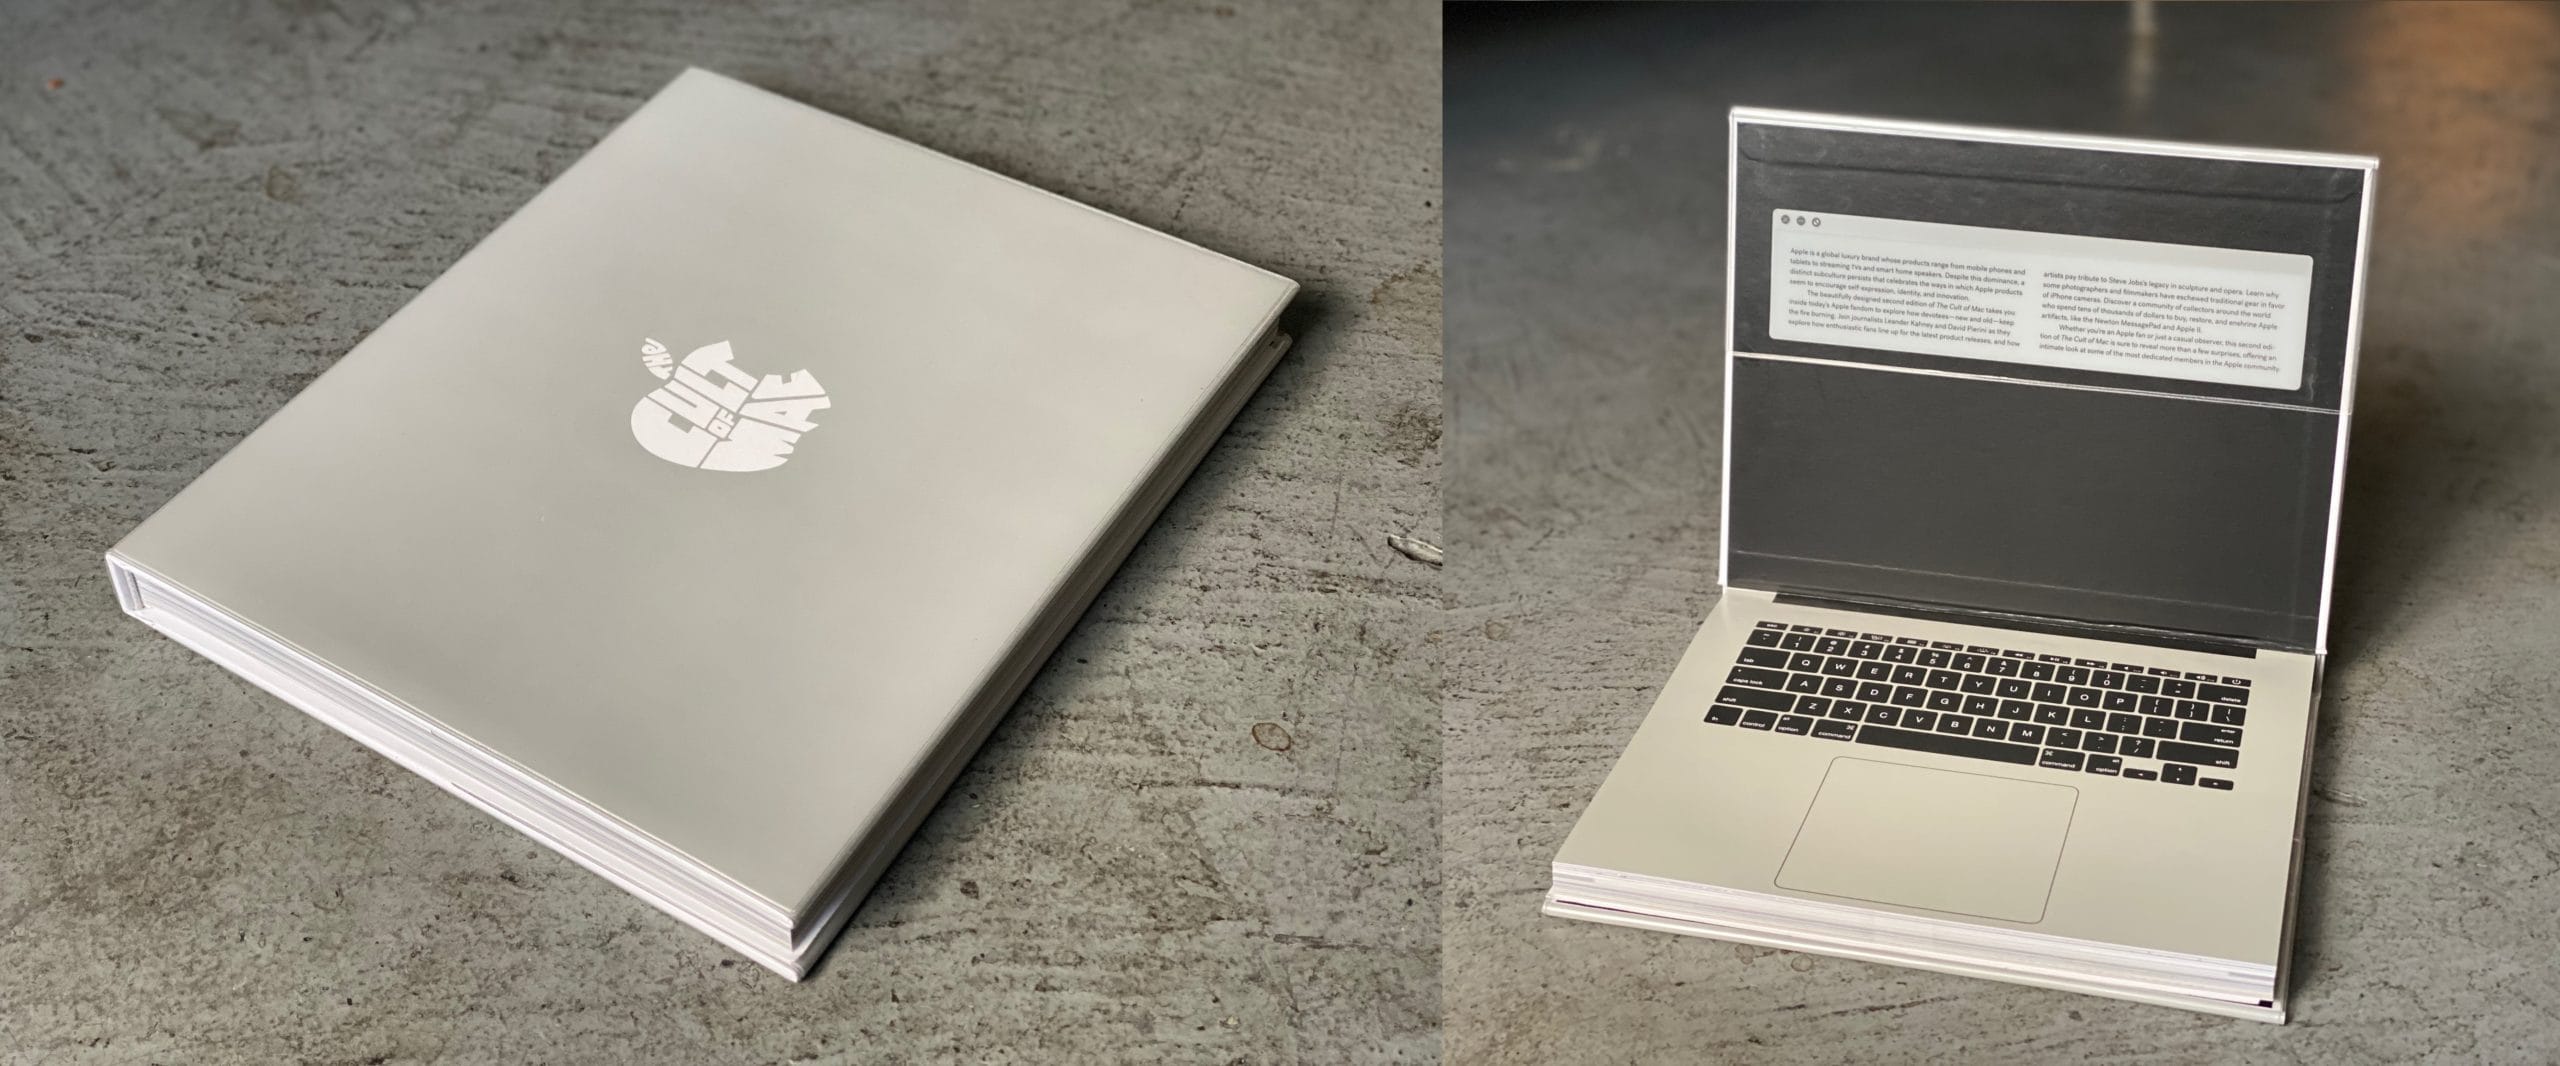 Innovative design: The Cult of Mac, 2nd Edition is the Mac book that looks like a MacBook.